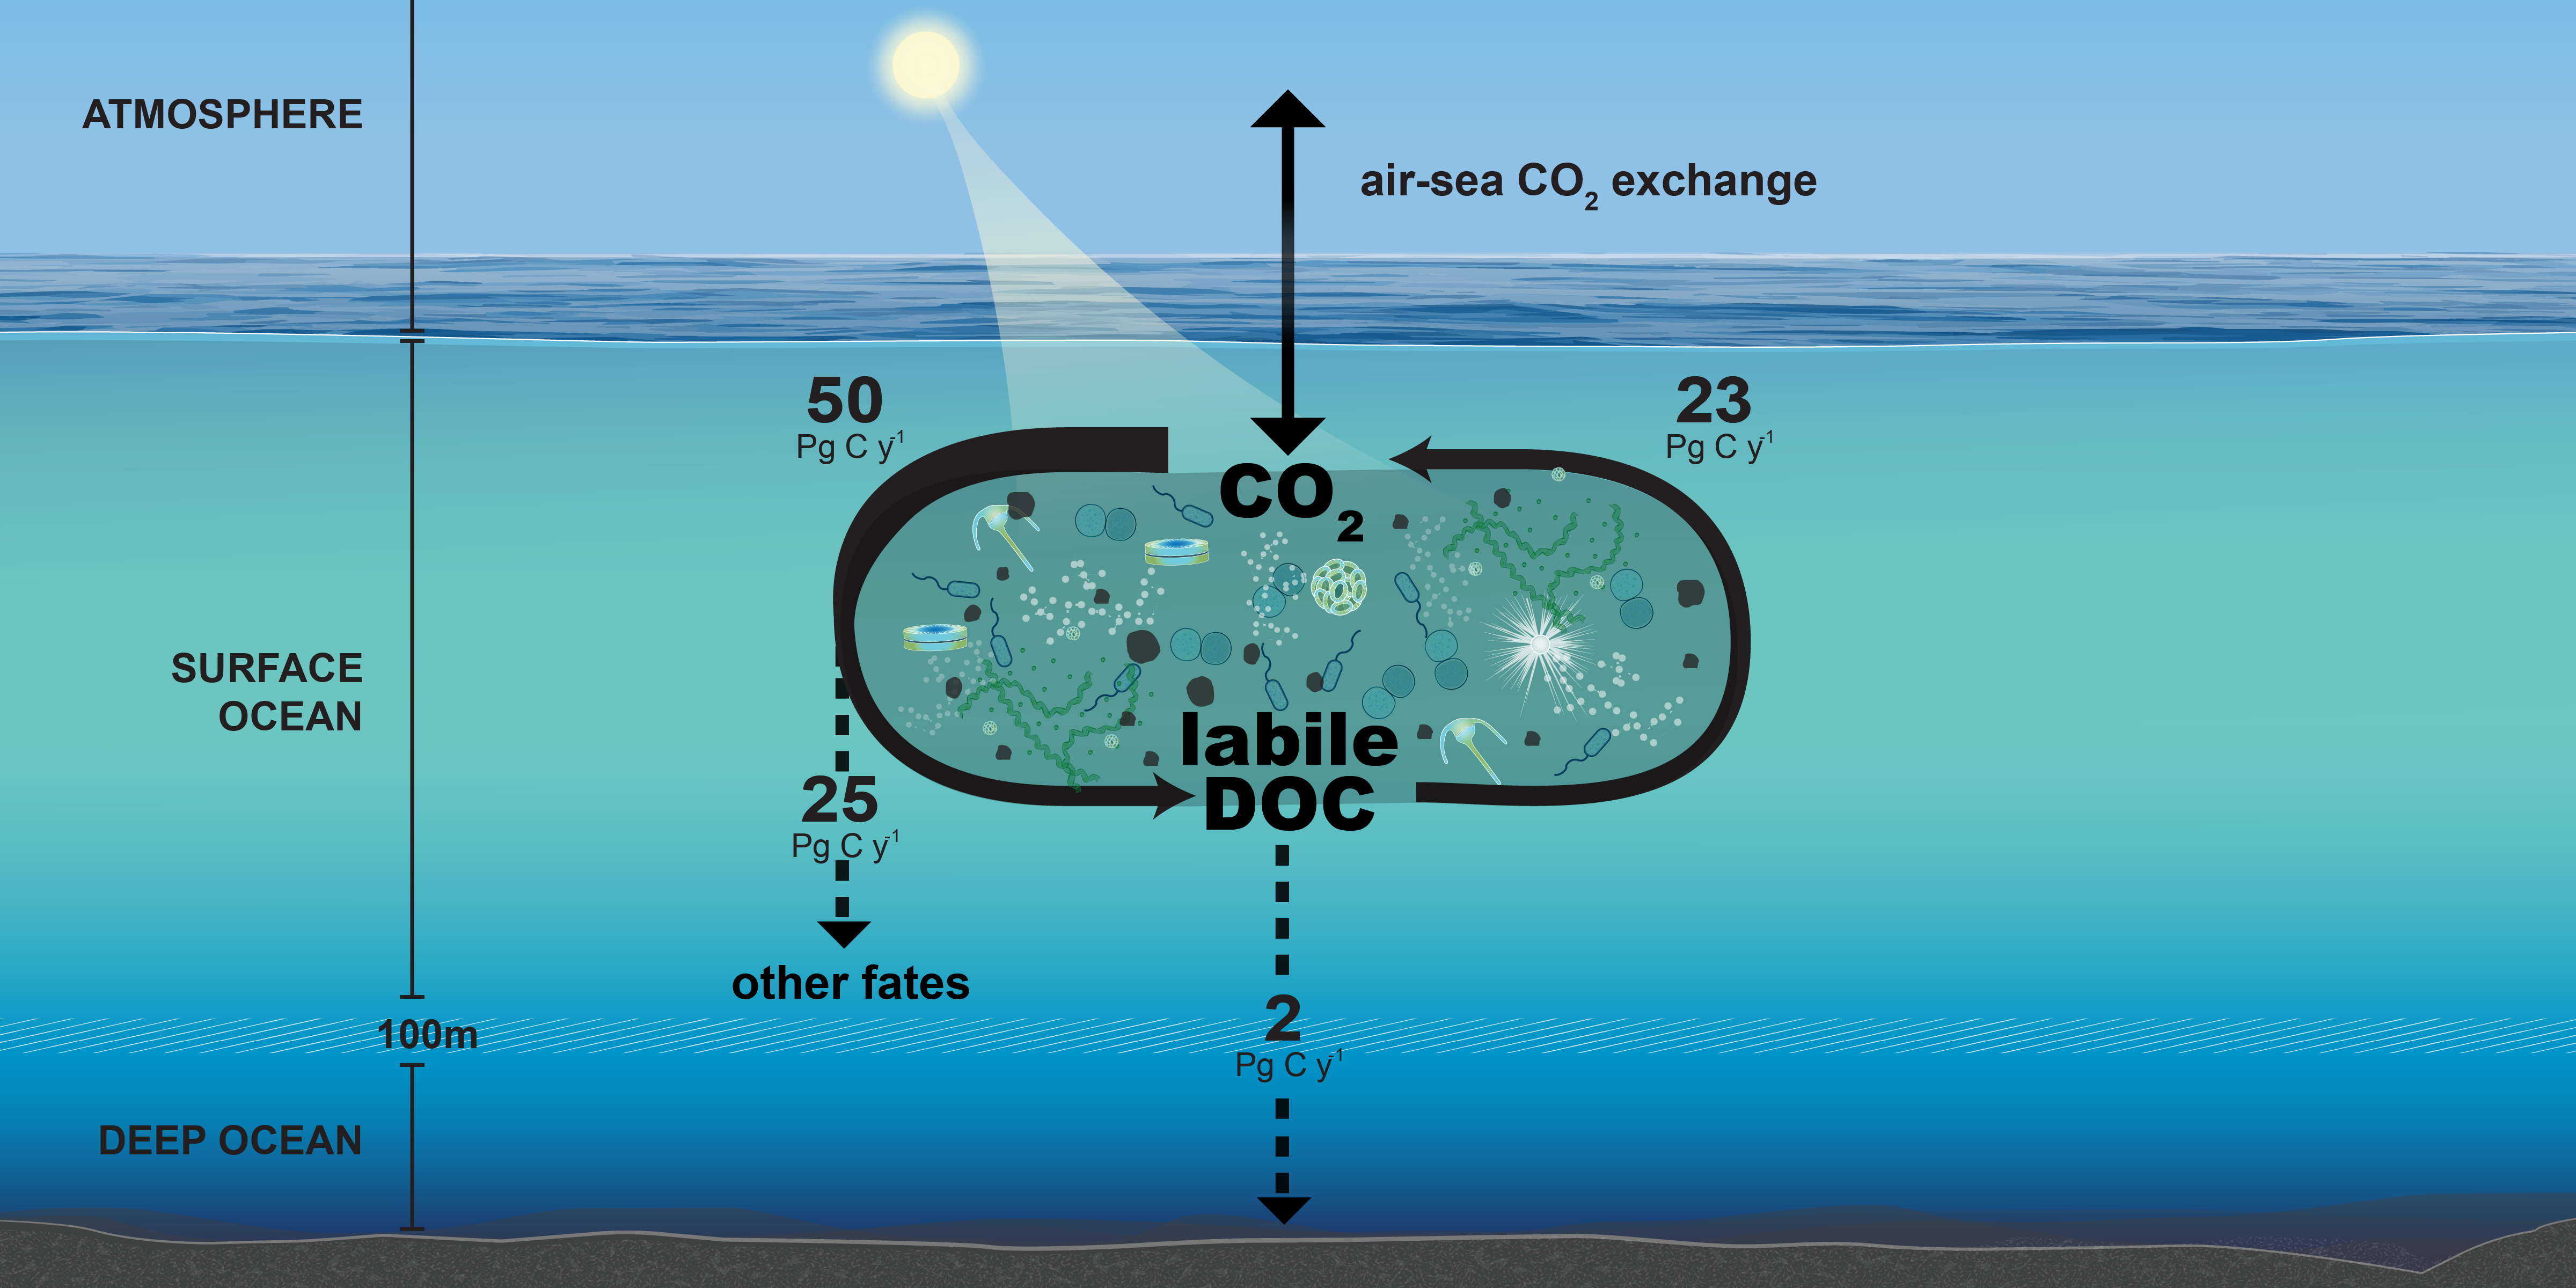 The ocean carbon cycle  shows the flux of carbon through the surface and deep ocean. Figure created by WHOI Creative Studio.